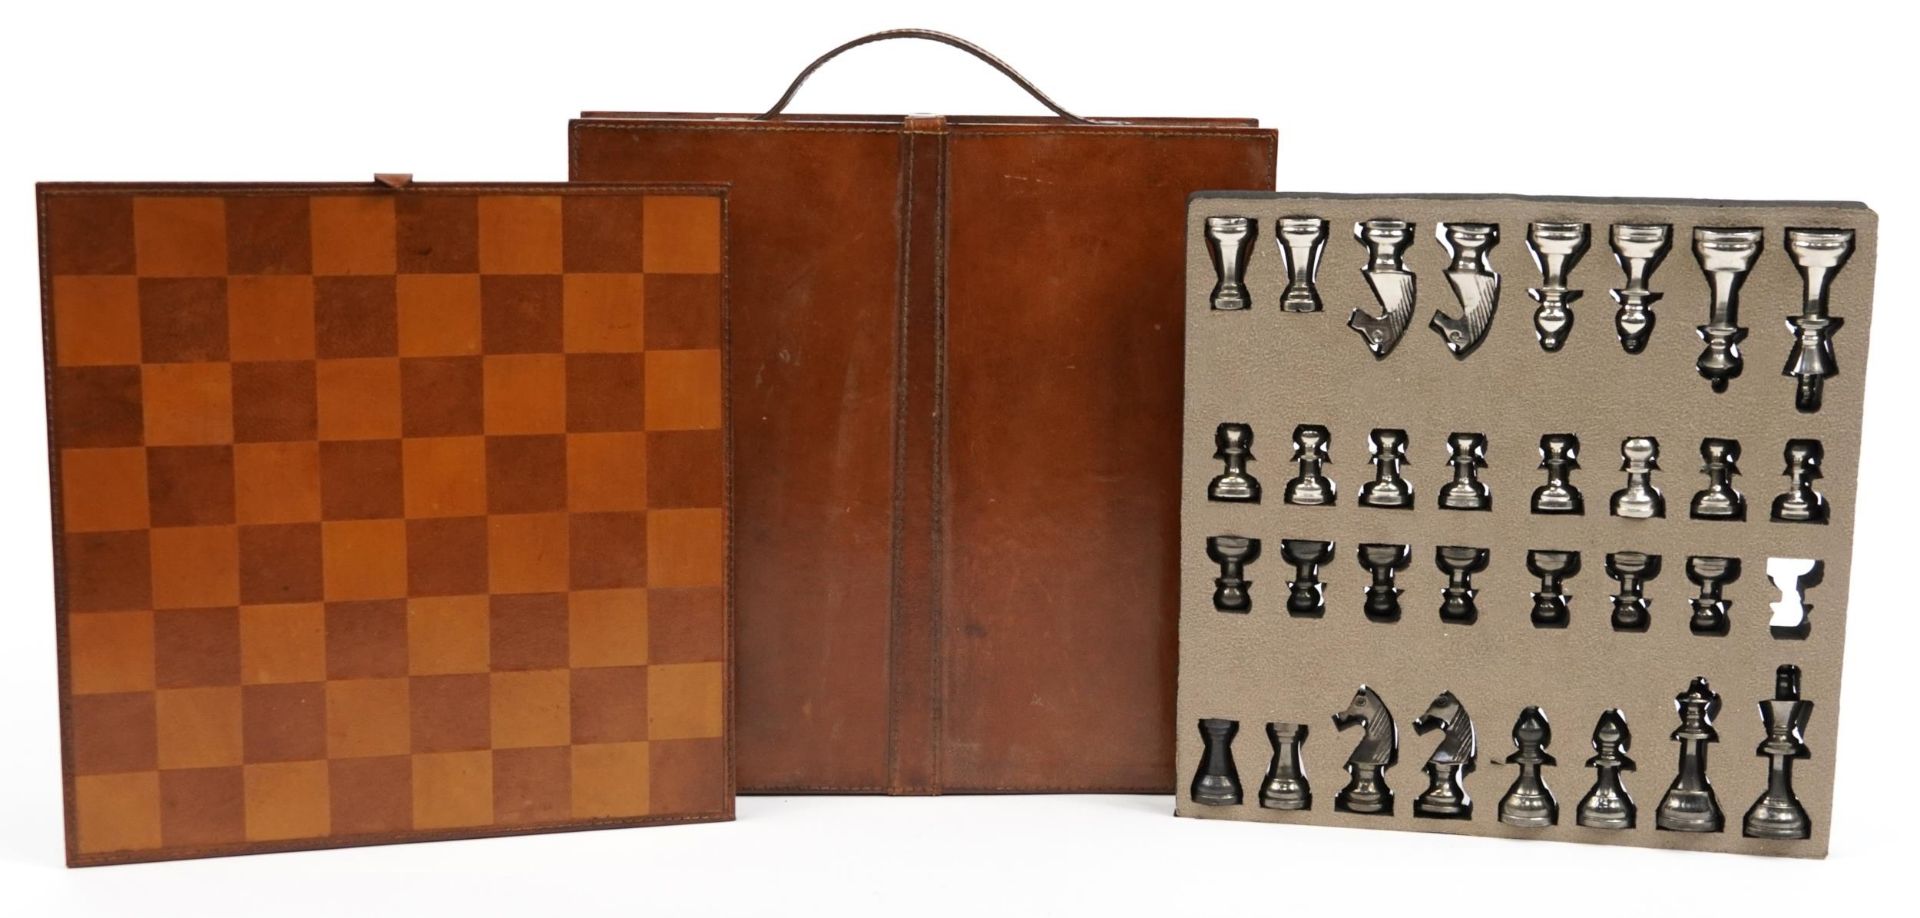 Tan leather cased travelling chess set with cast metal pieces, the largest piece 8cm high